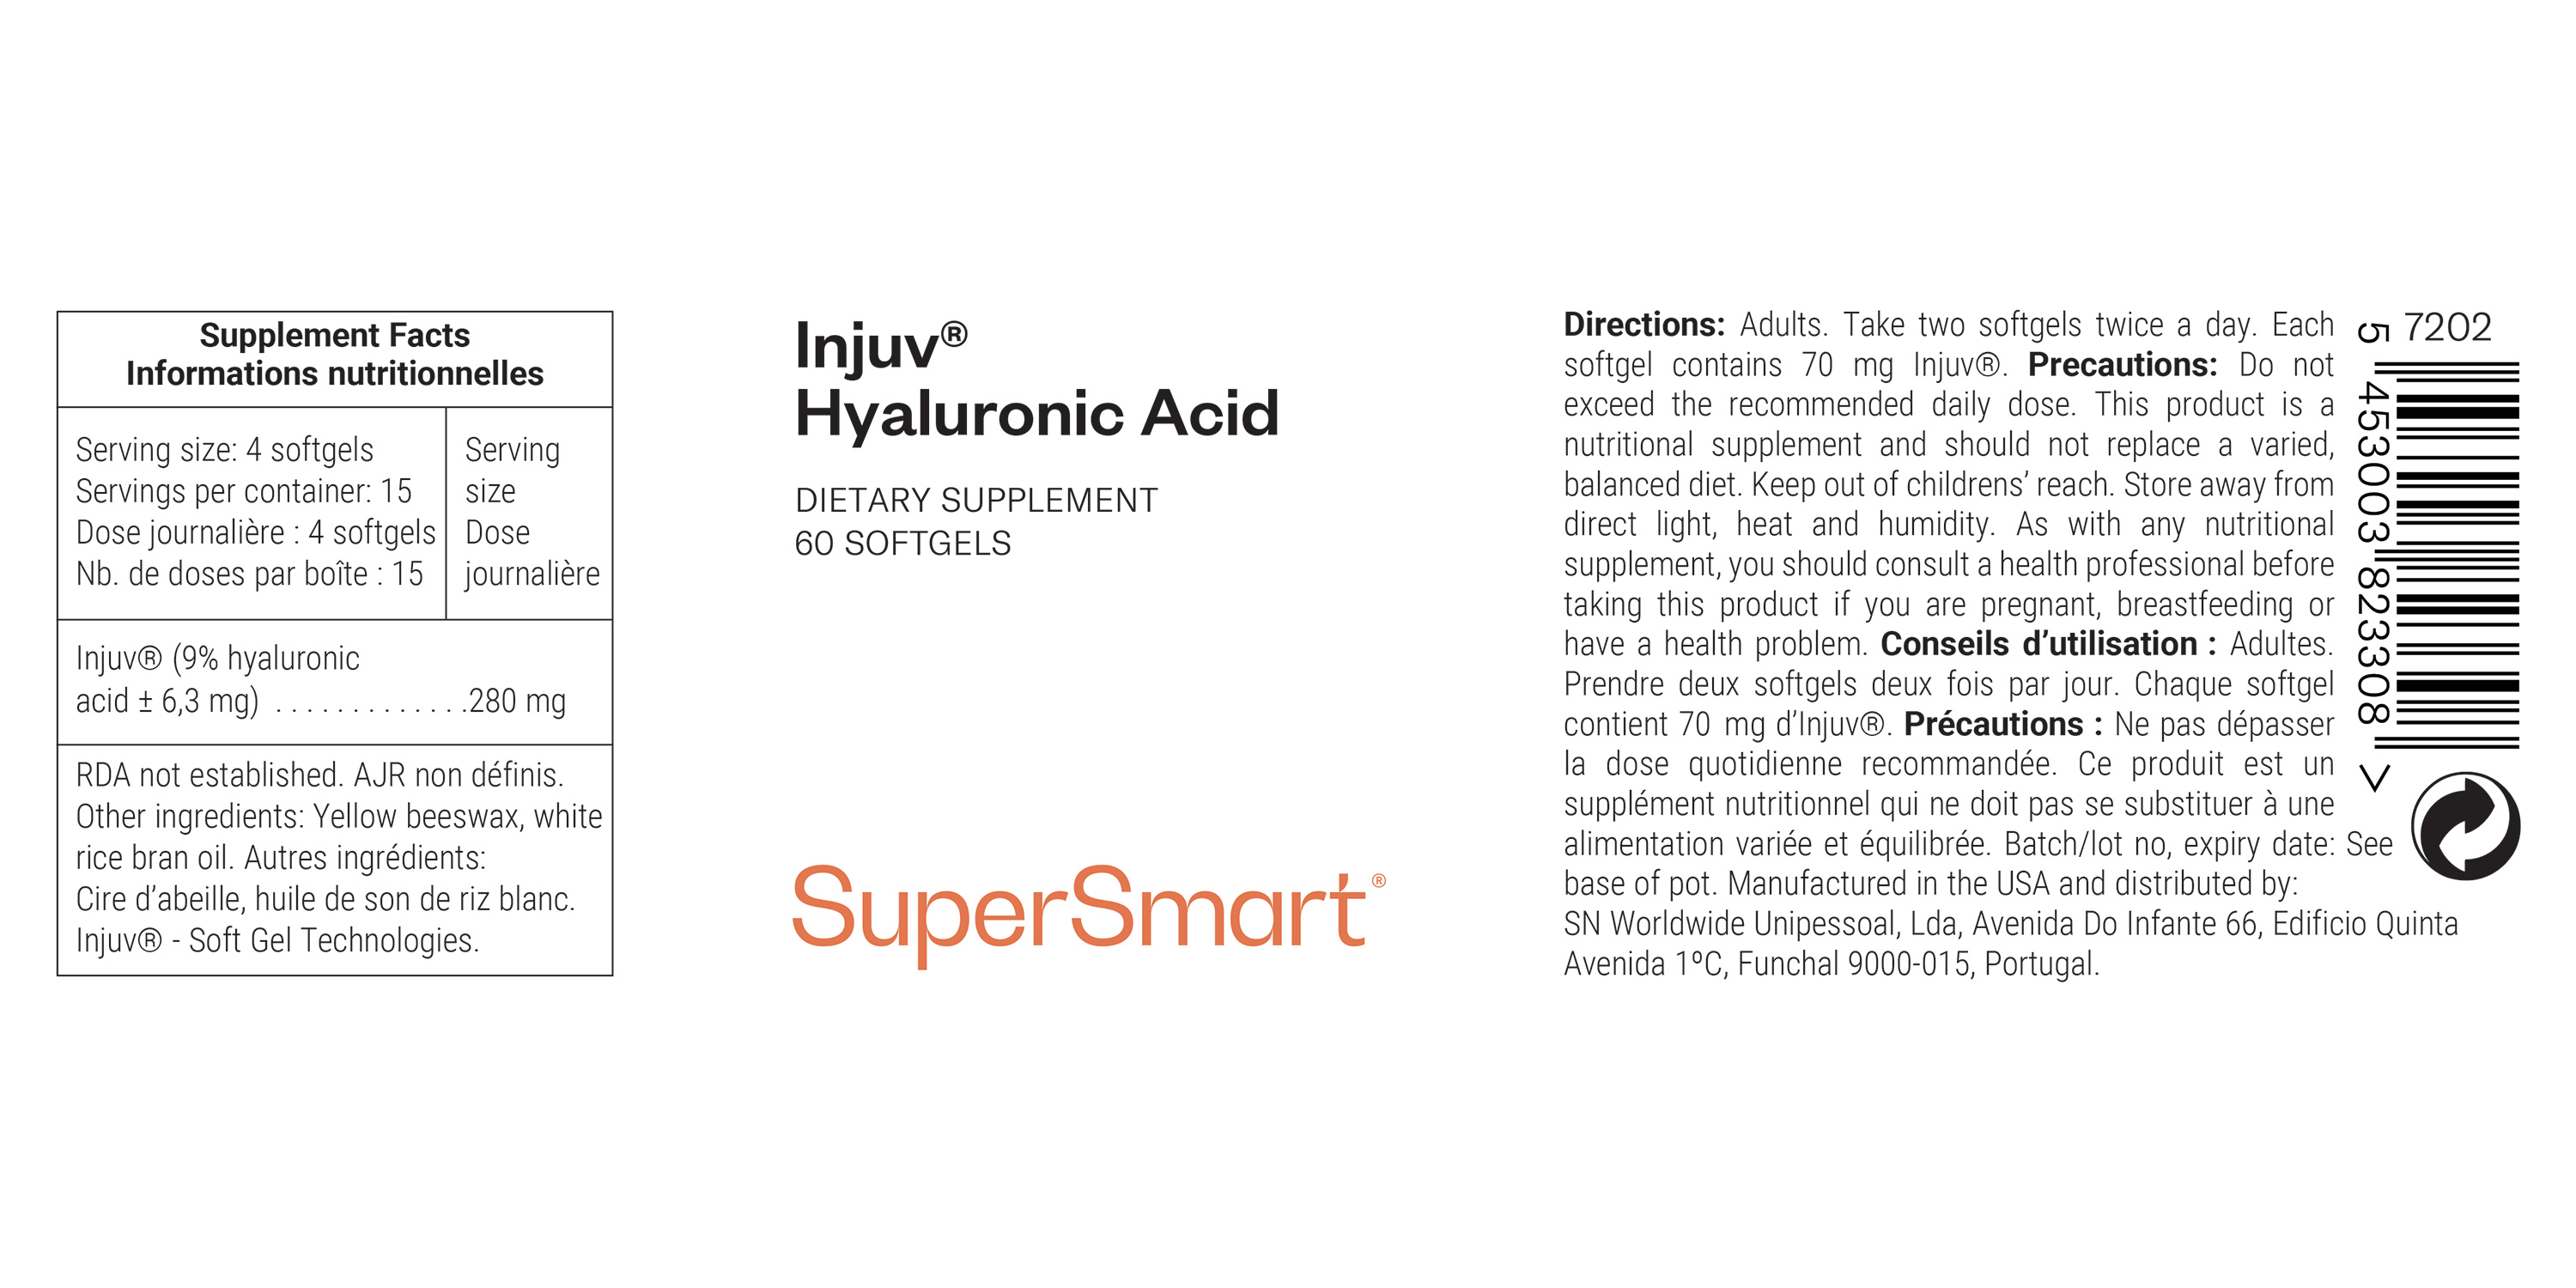 Injuv® Hyaluronic Acid dietary supplement, contributes for skin and joint hydration